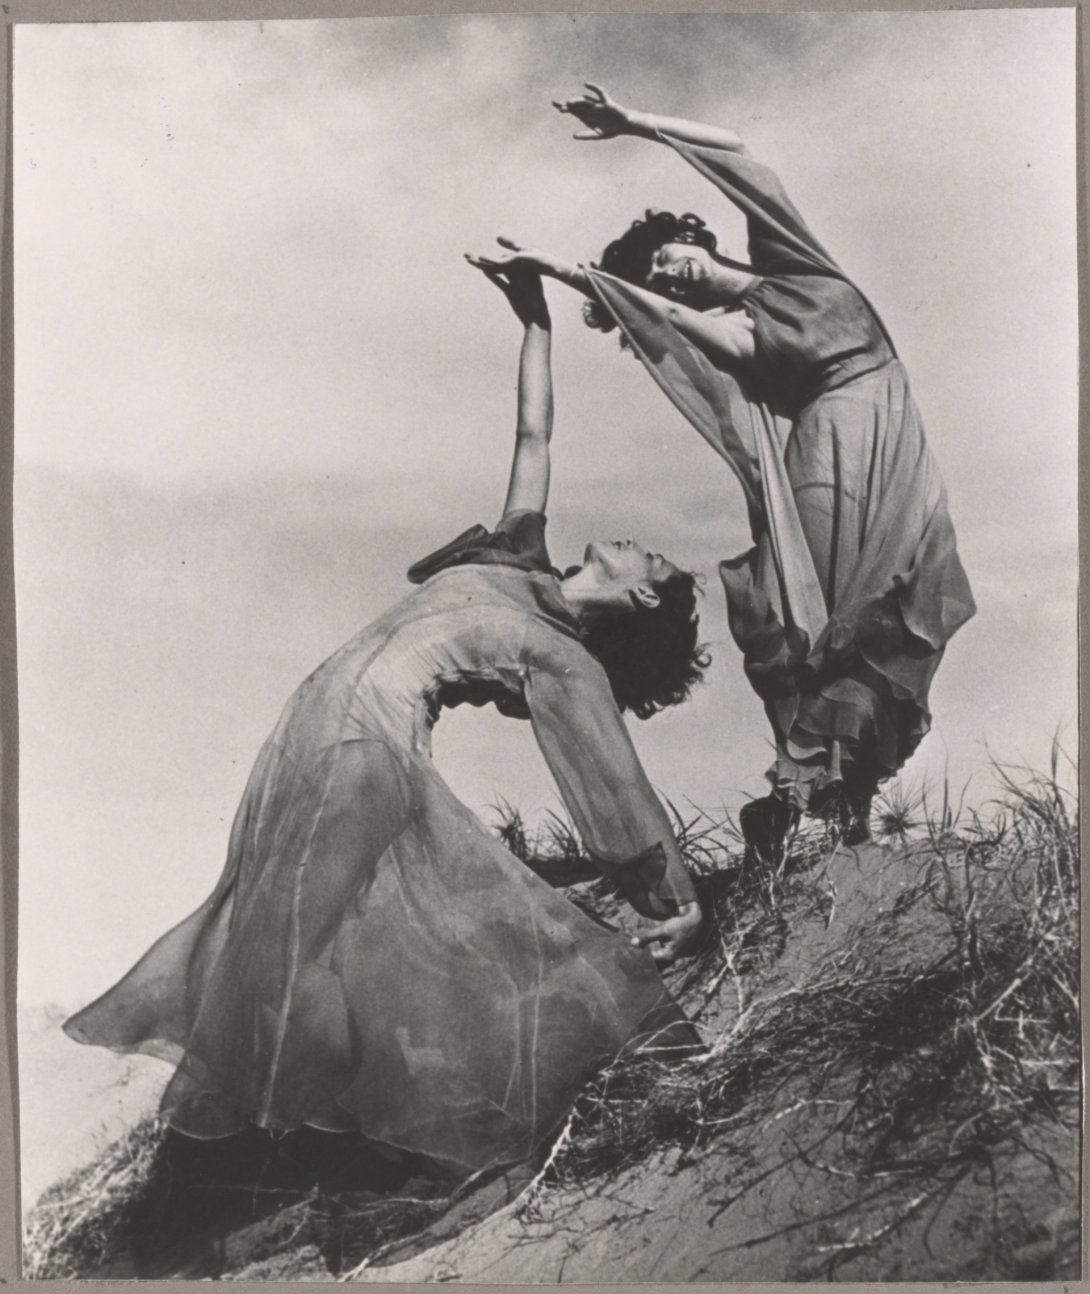 A black and white photograph of two women in long dresses posing on a sand bank